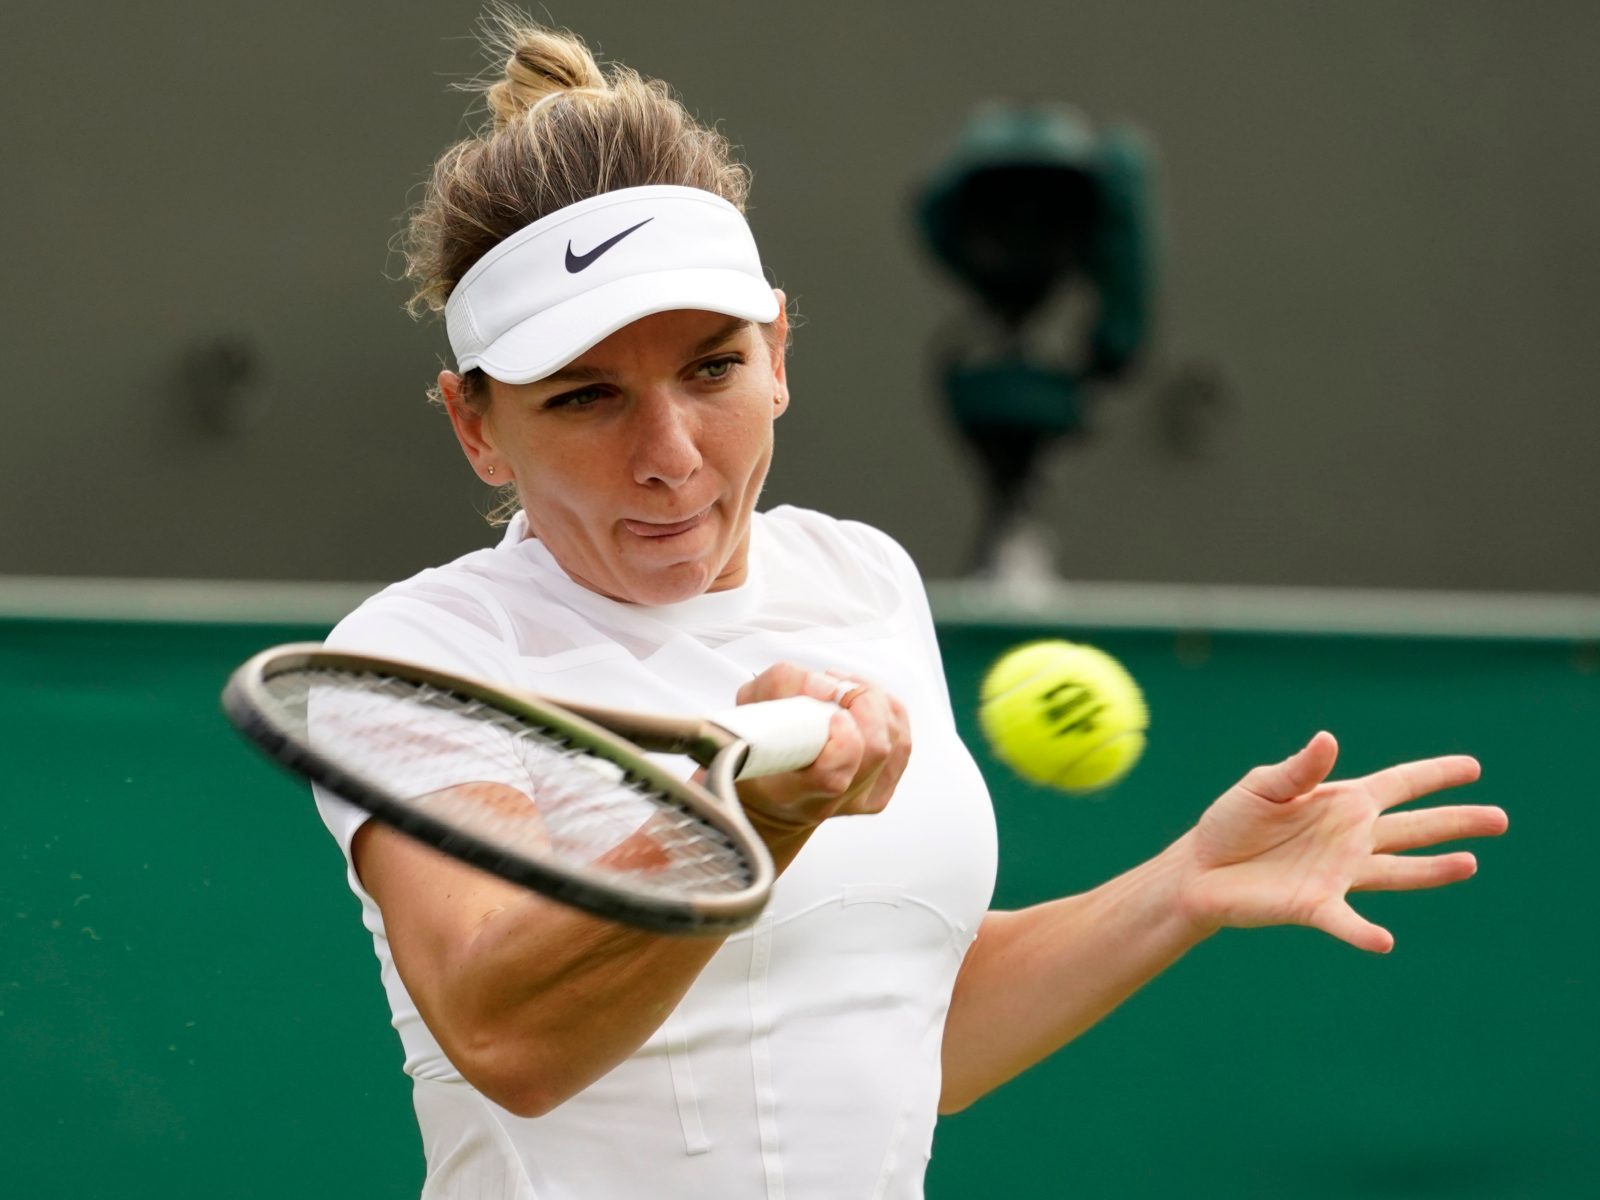 Simona Halep Undergoes Nose Surgery, Out For Rest of 2022